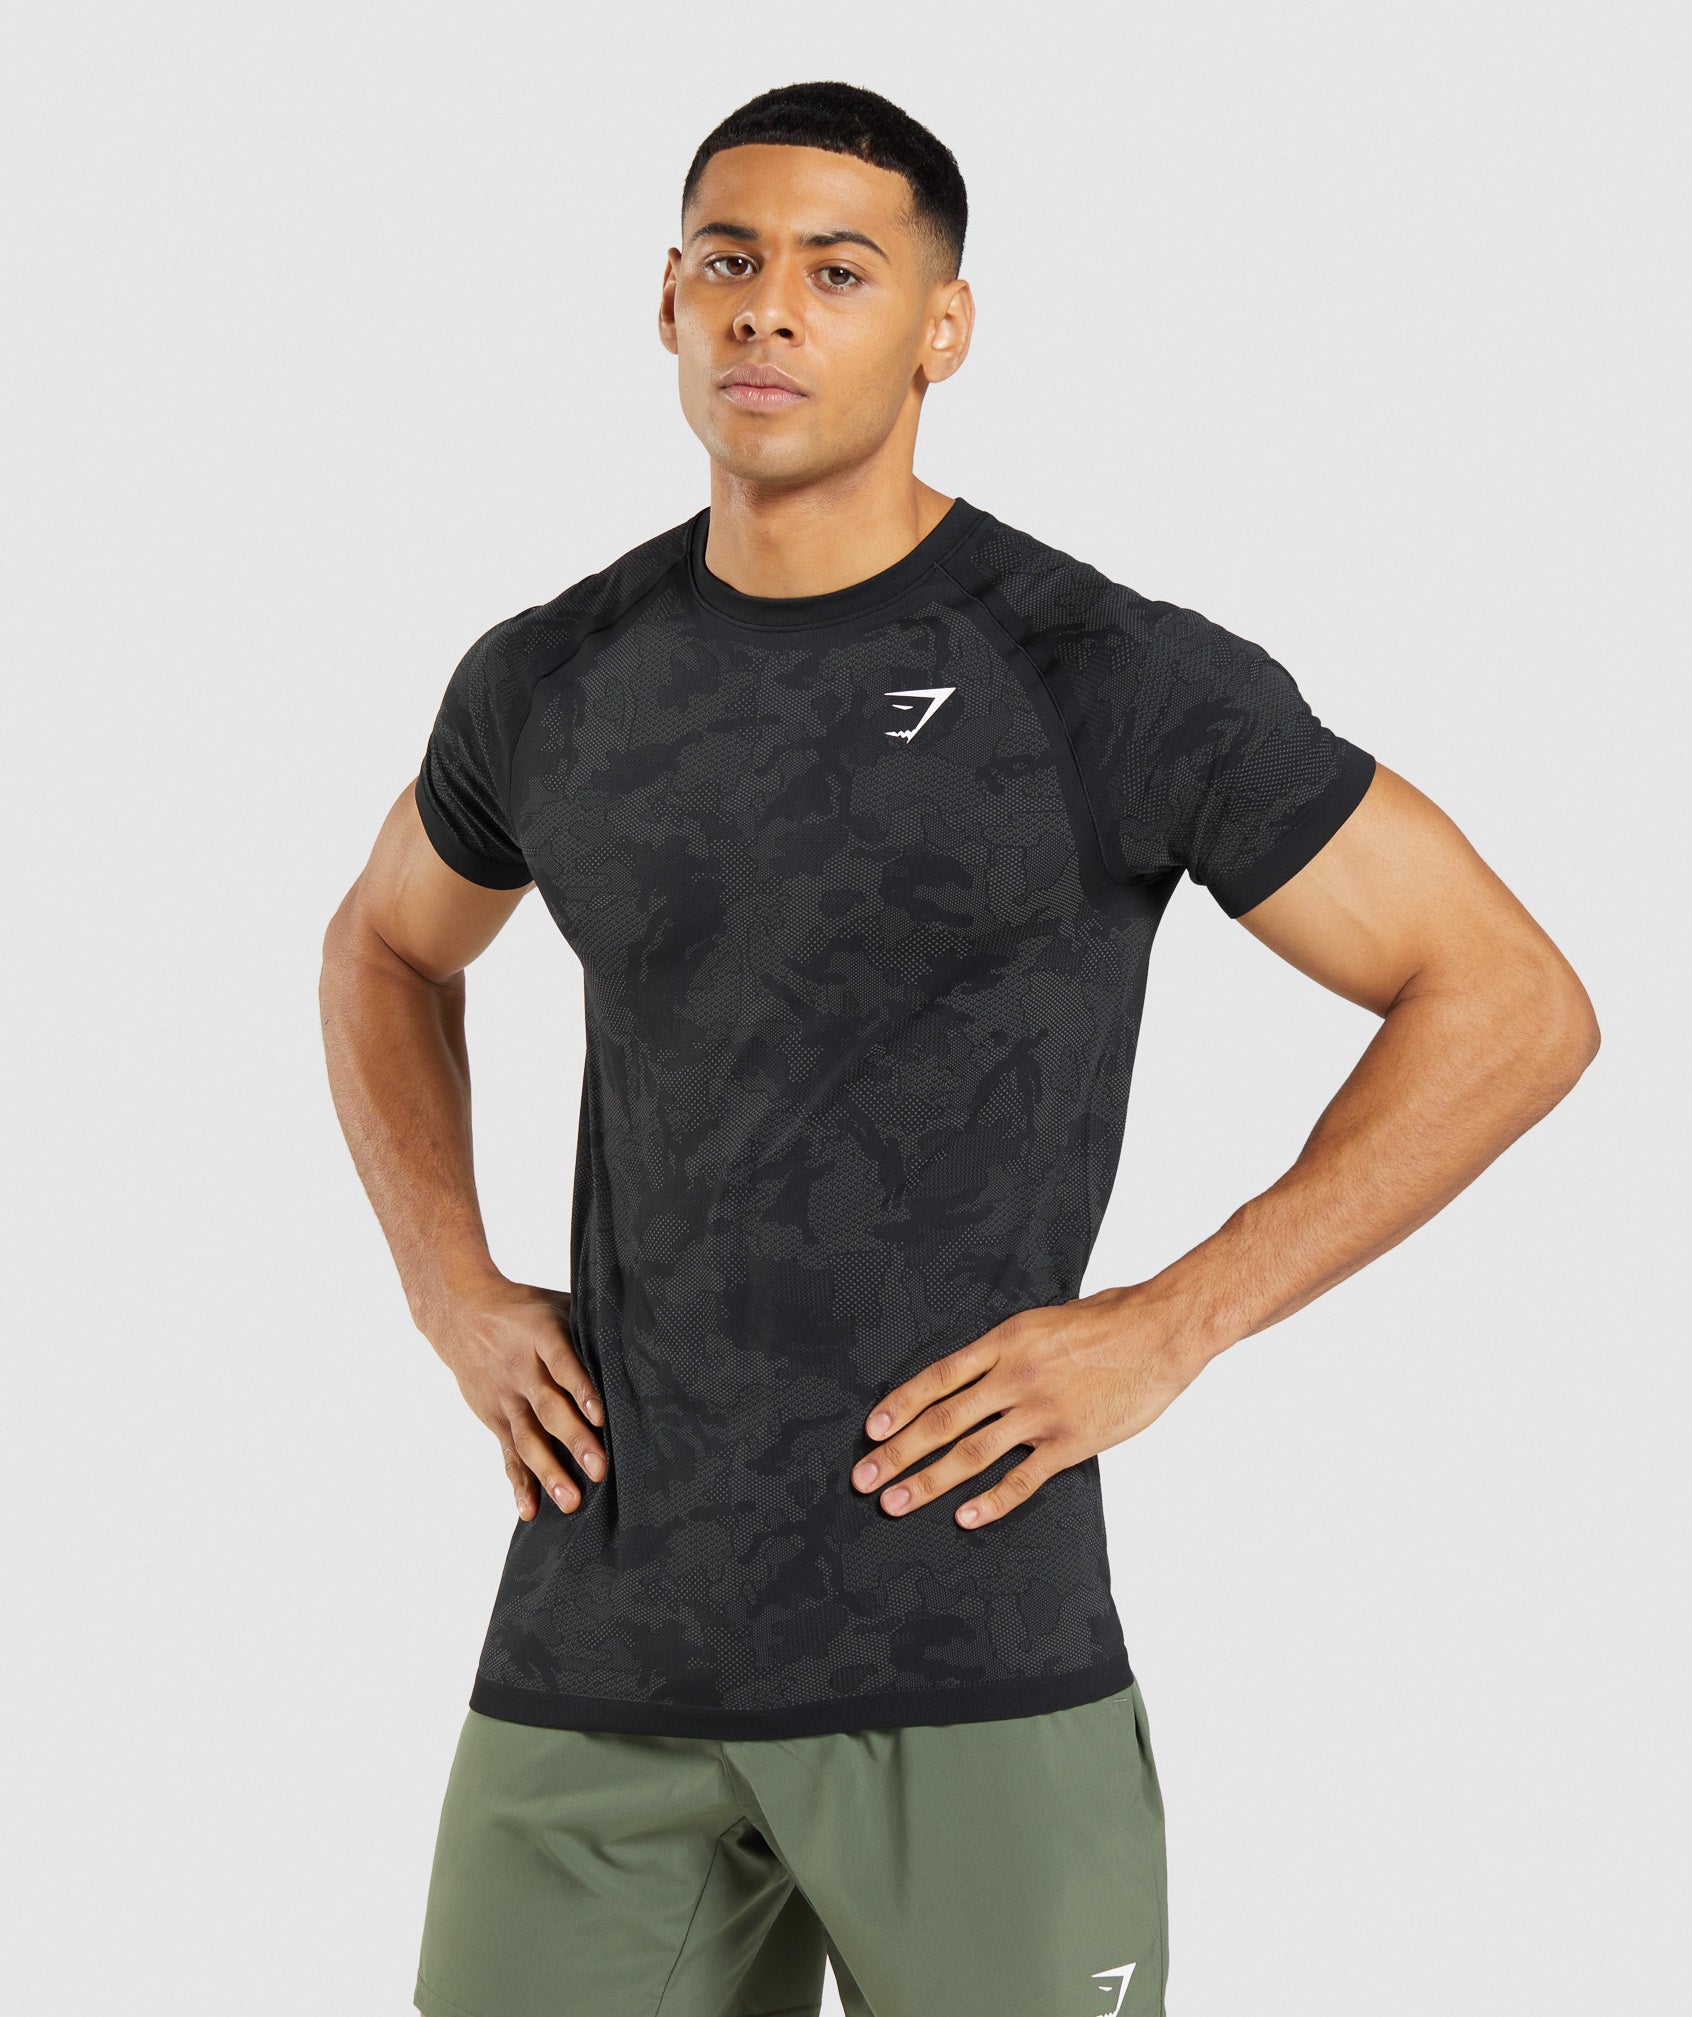 Geo Seamless T-Shirt in Black/Charcoal Grey - view 1